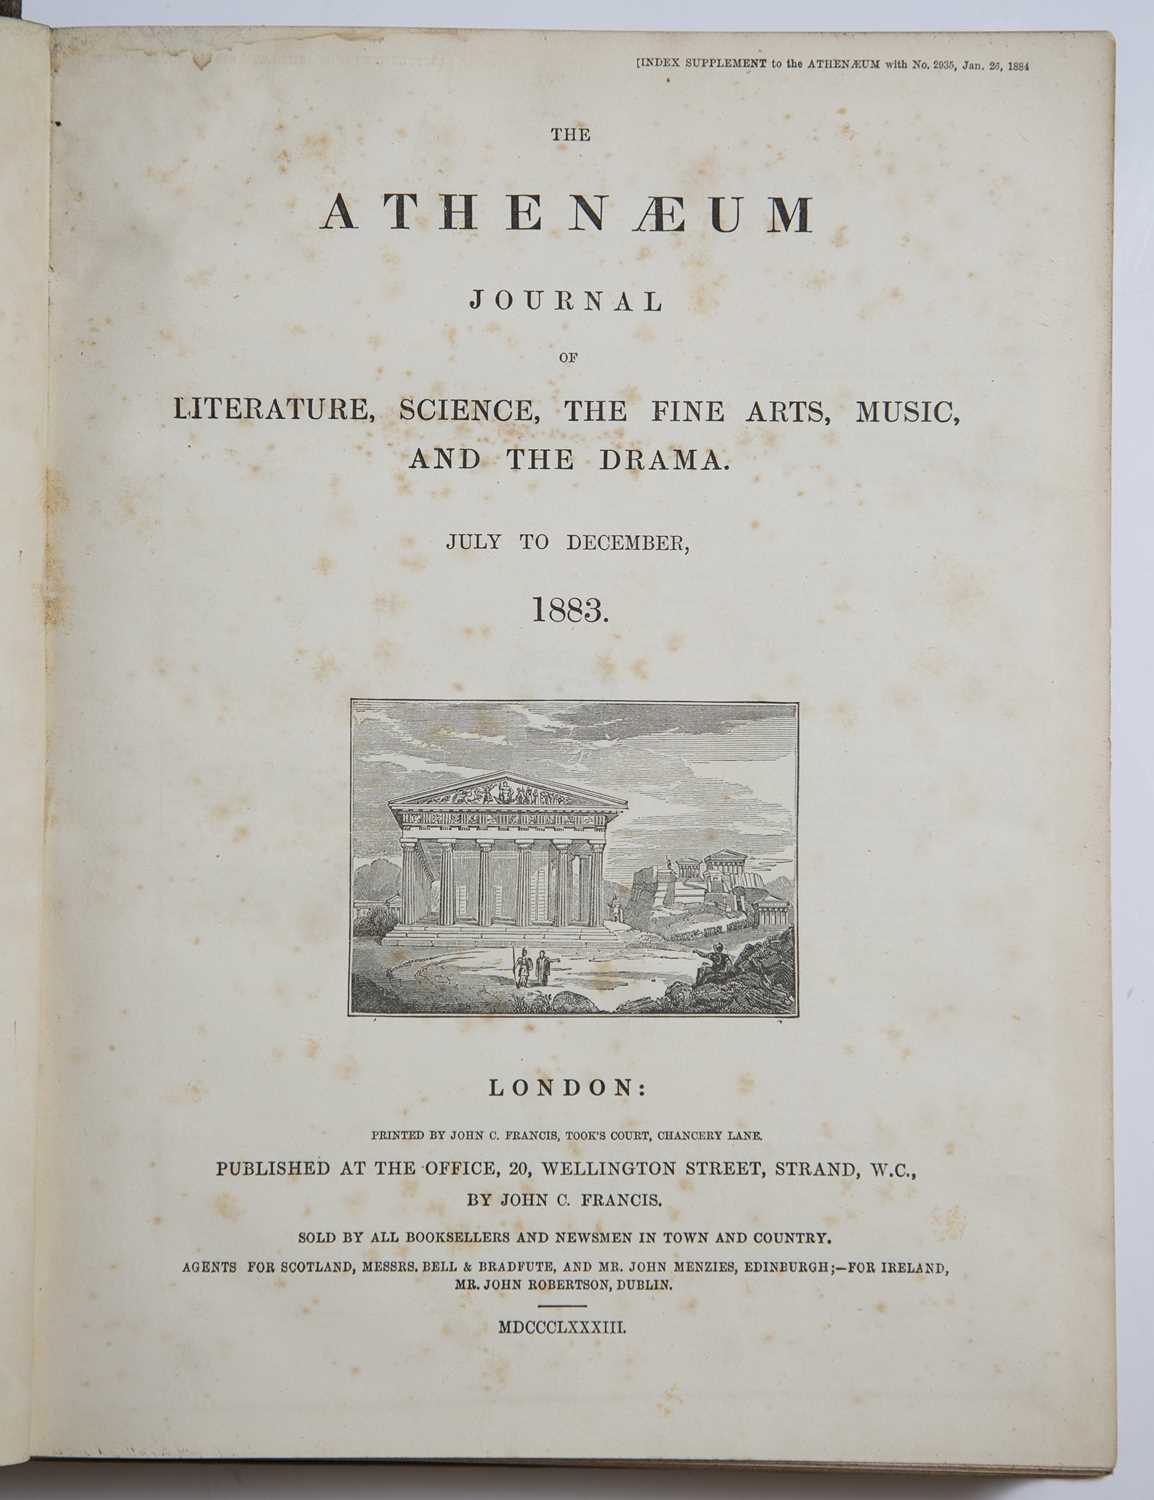 The Athenaeum Journal of Literature Science and the Fine Arts, approximately 90 vols. 1836-1921 with - Image 2 of 2